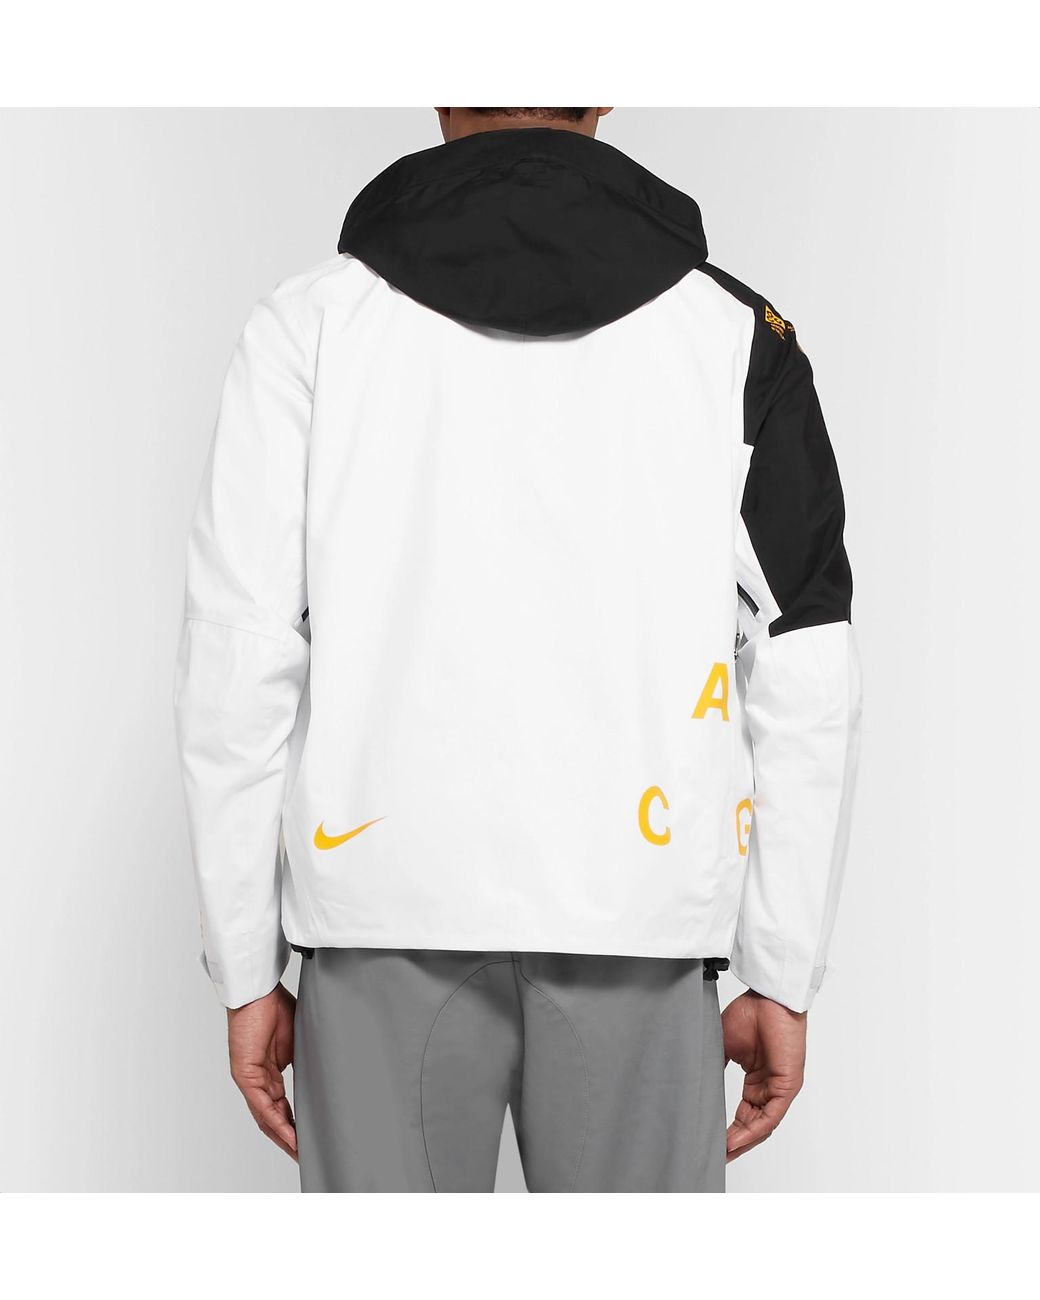 Nike Lab Acg Deploy Gore-tex Jacket in White for Men | Lyst